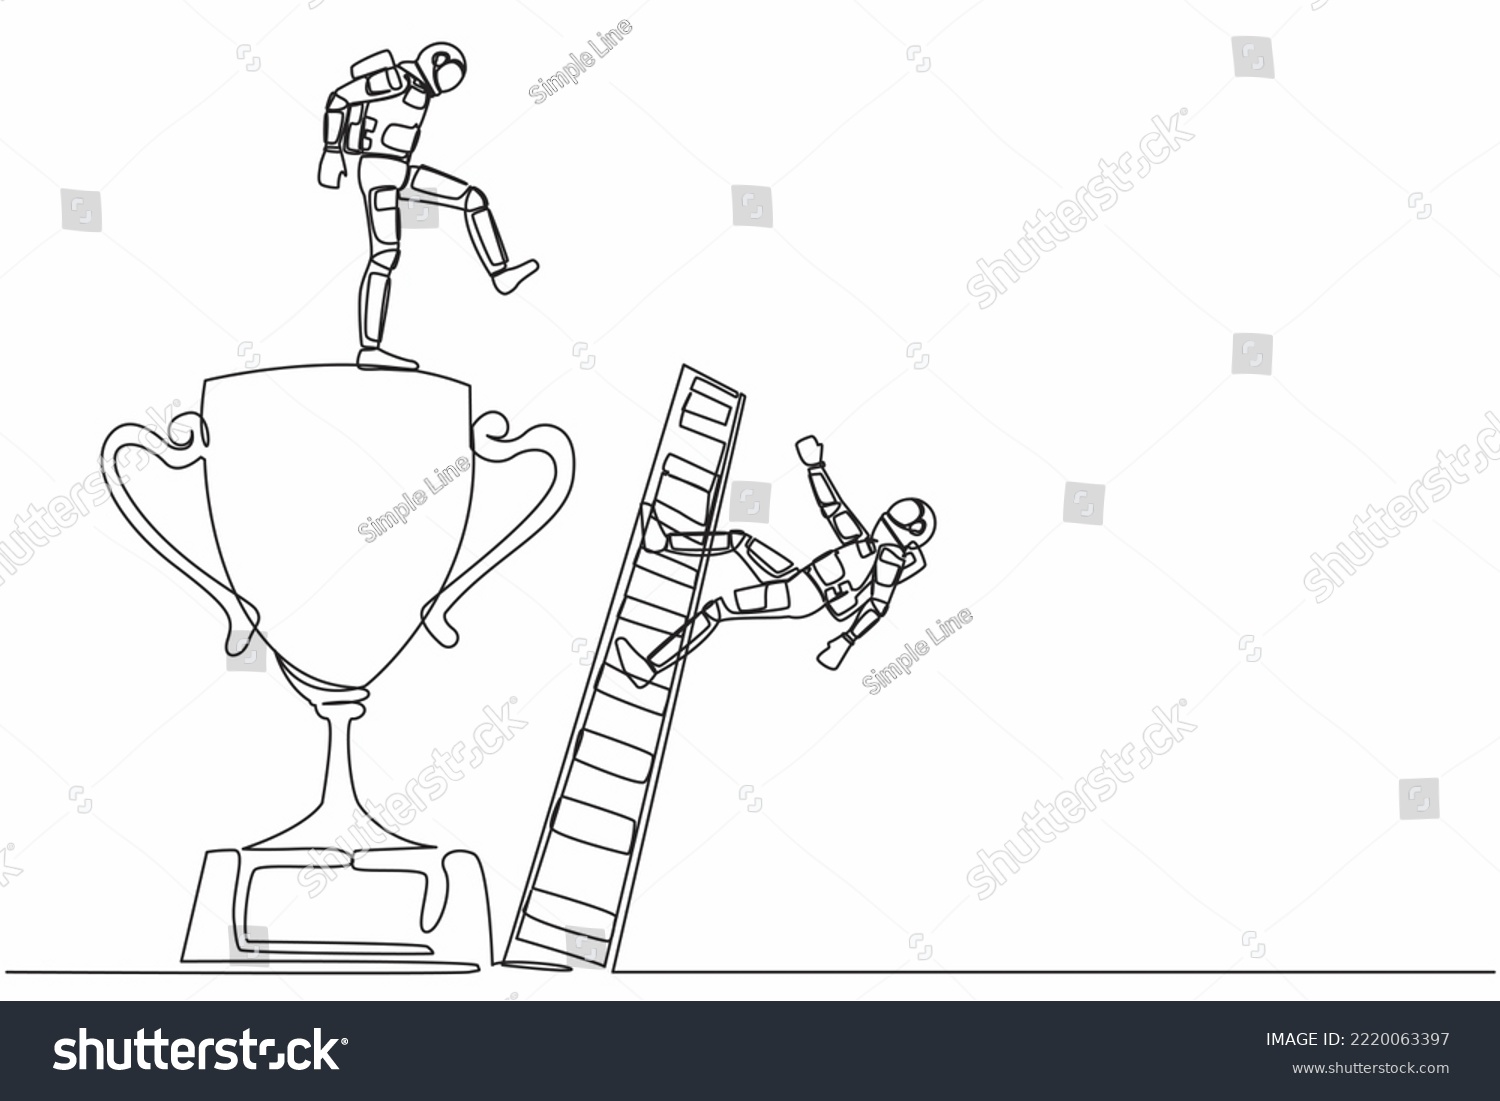 SVG of Single one line drawing of young astronaut kicking to make his rival falling down from the top ladder trophy of success in moon surface. Cosmic galaxy space. Continuous line design vector illustration svg